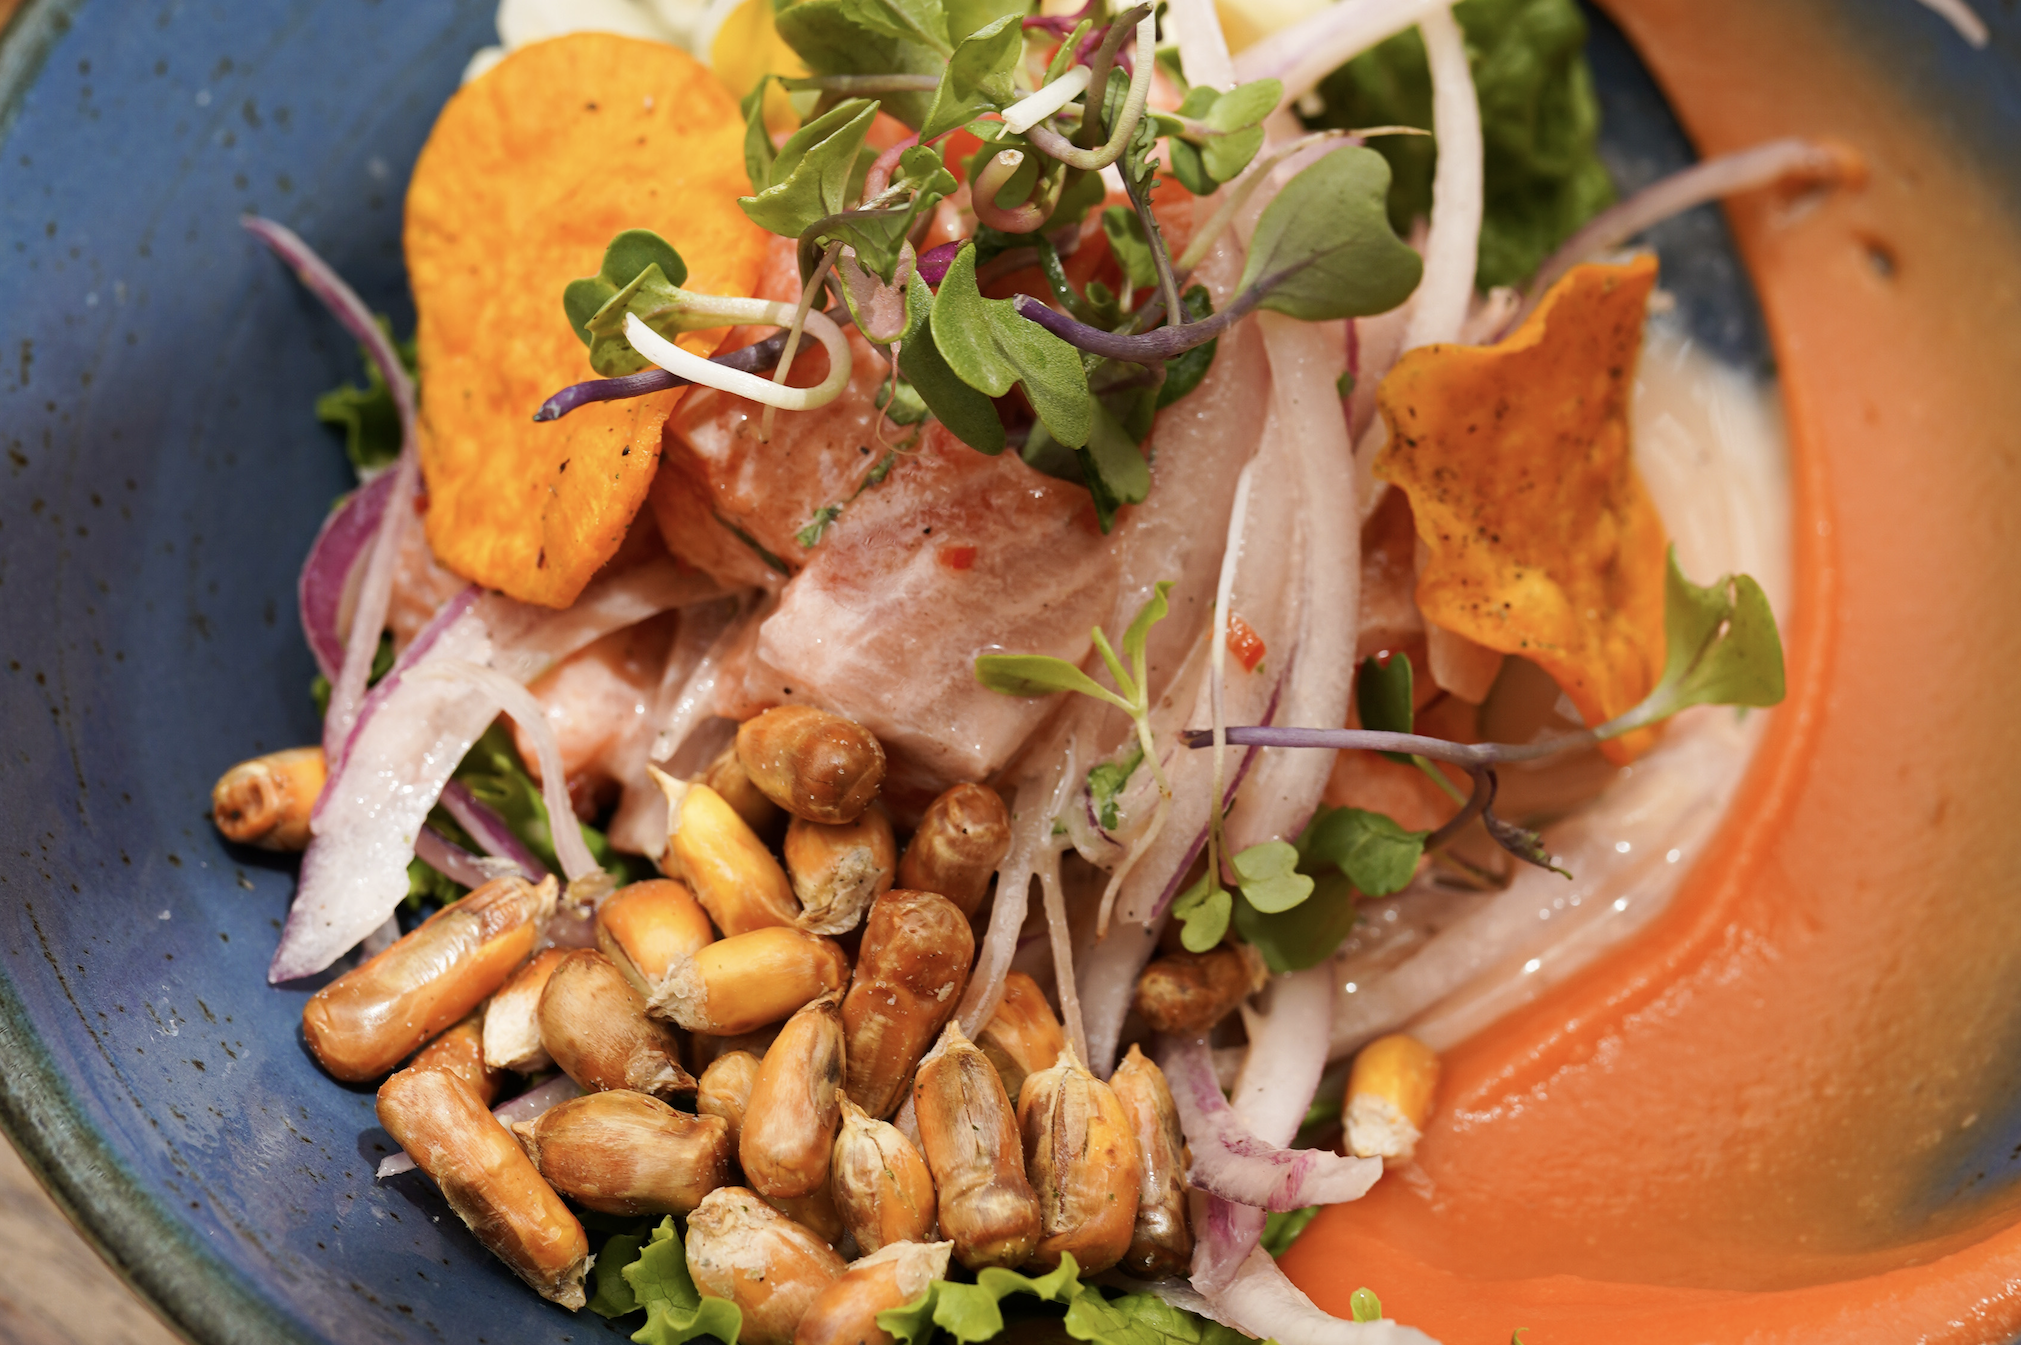 Las Qolqas' ceviche is somewhat atypical from what's on offer at most cevicherias in Peru